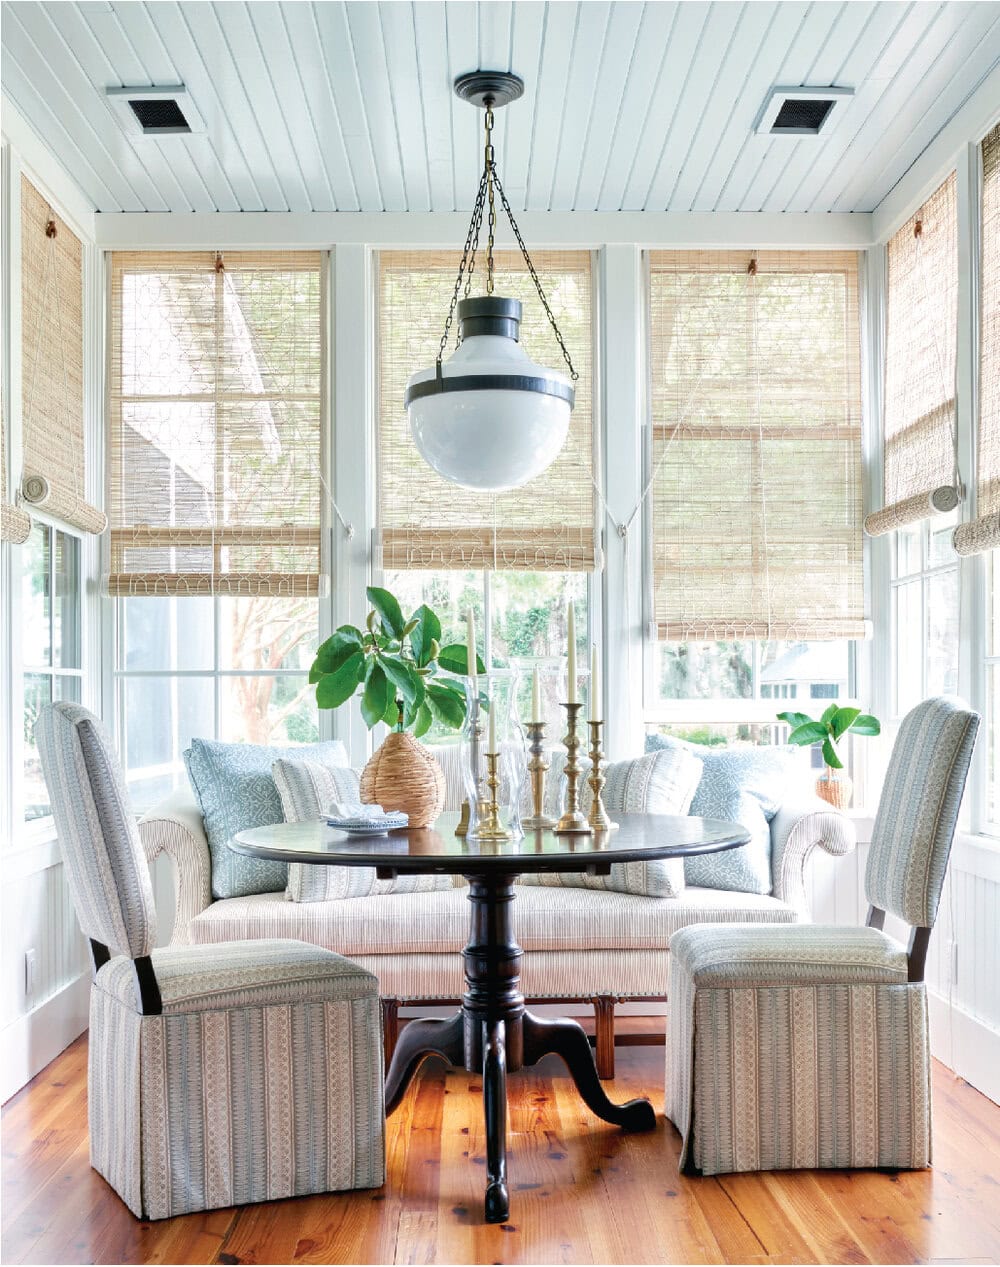 Relaxed elegance design! White and blue kitchen breakfast nook featured in interiors designed by Heather Chadduck